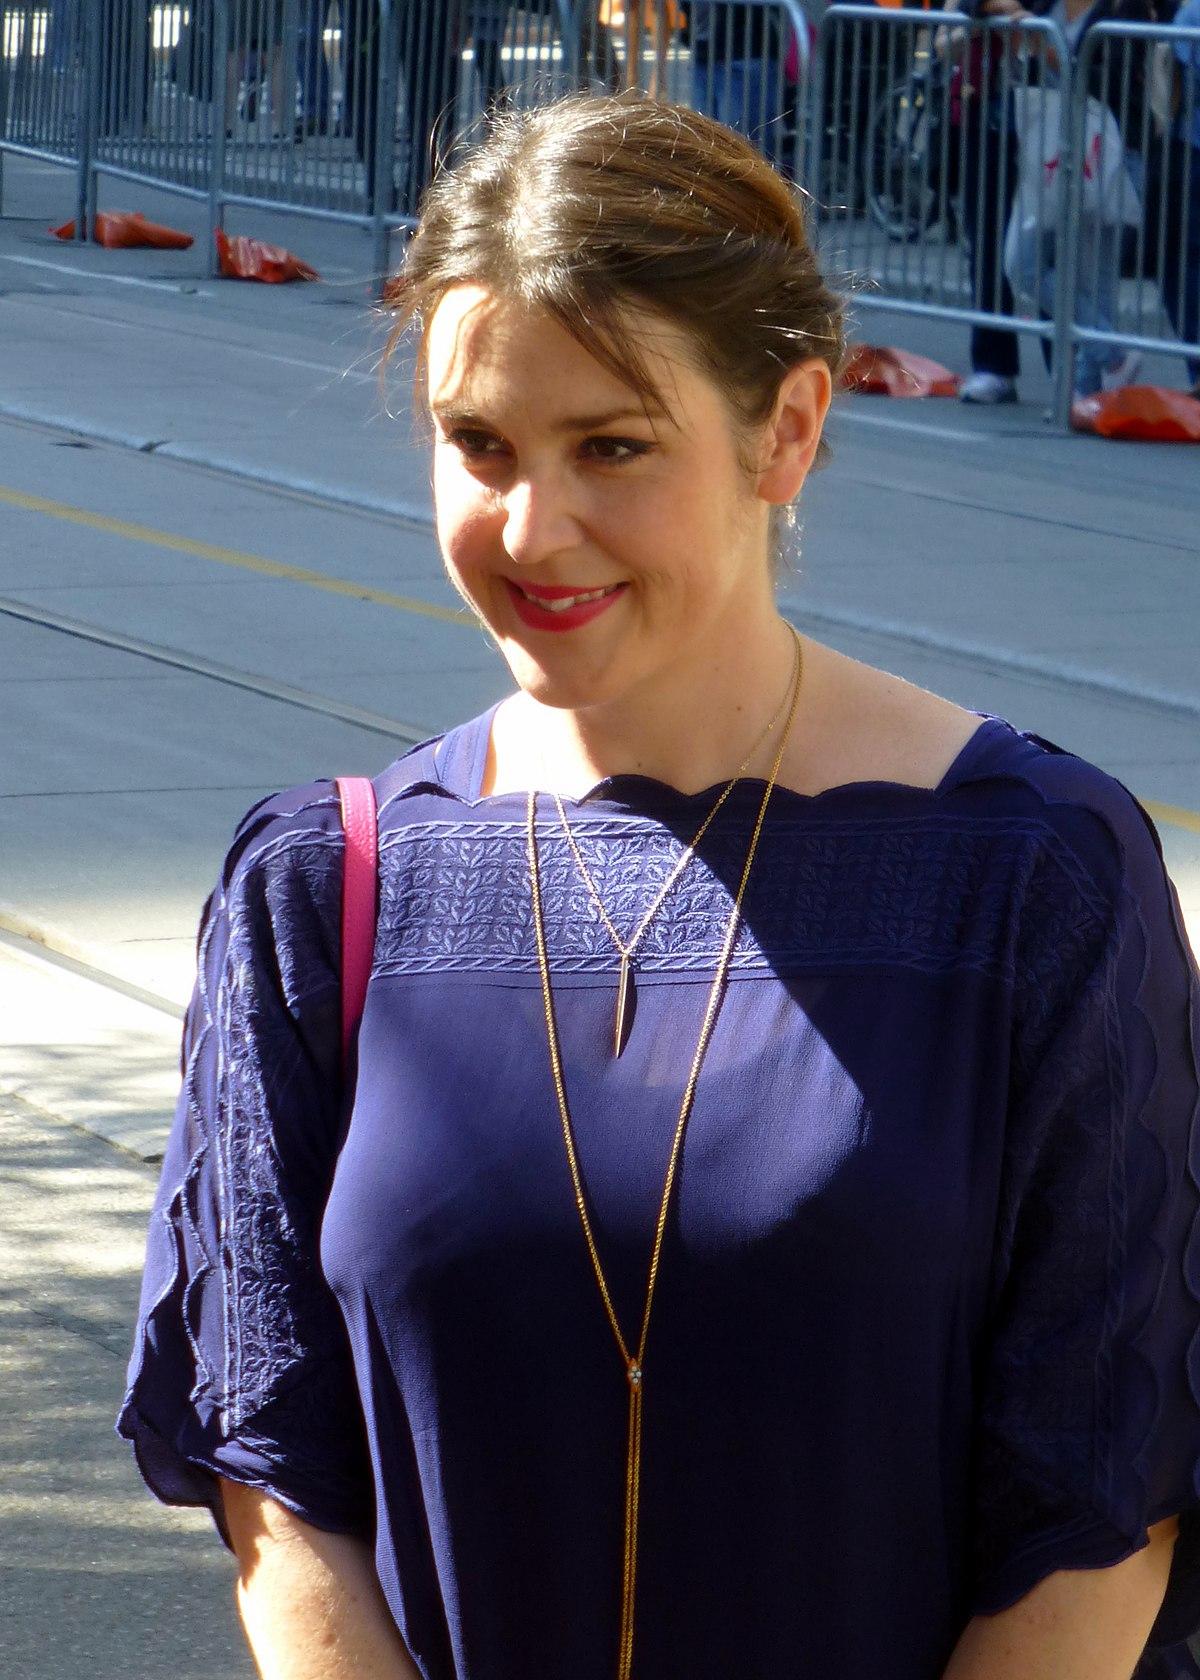 60+ Hot Pictures Of Melanie Lynskey Which Will Keep You Up At Nights 22